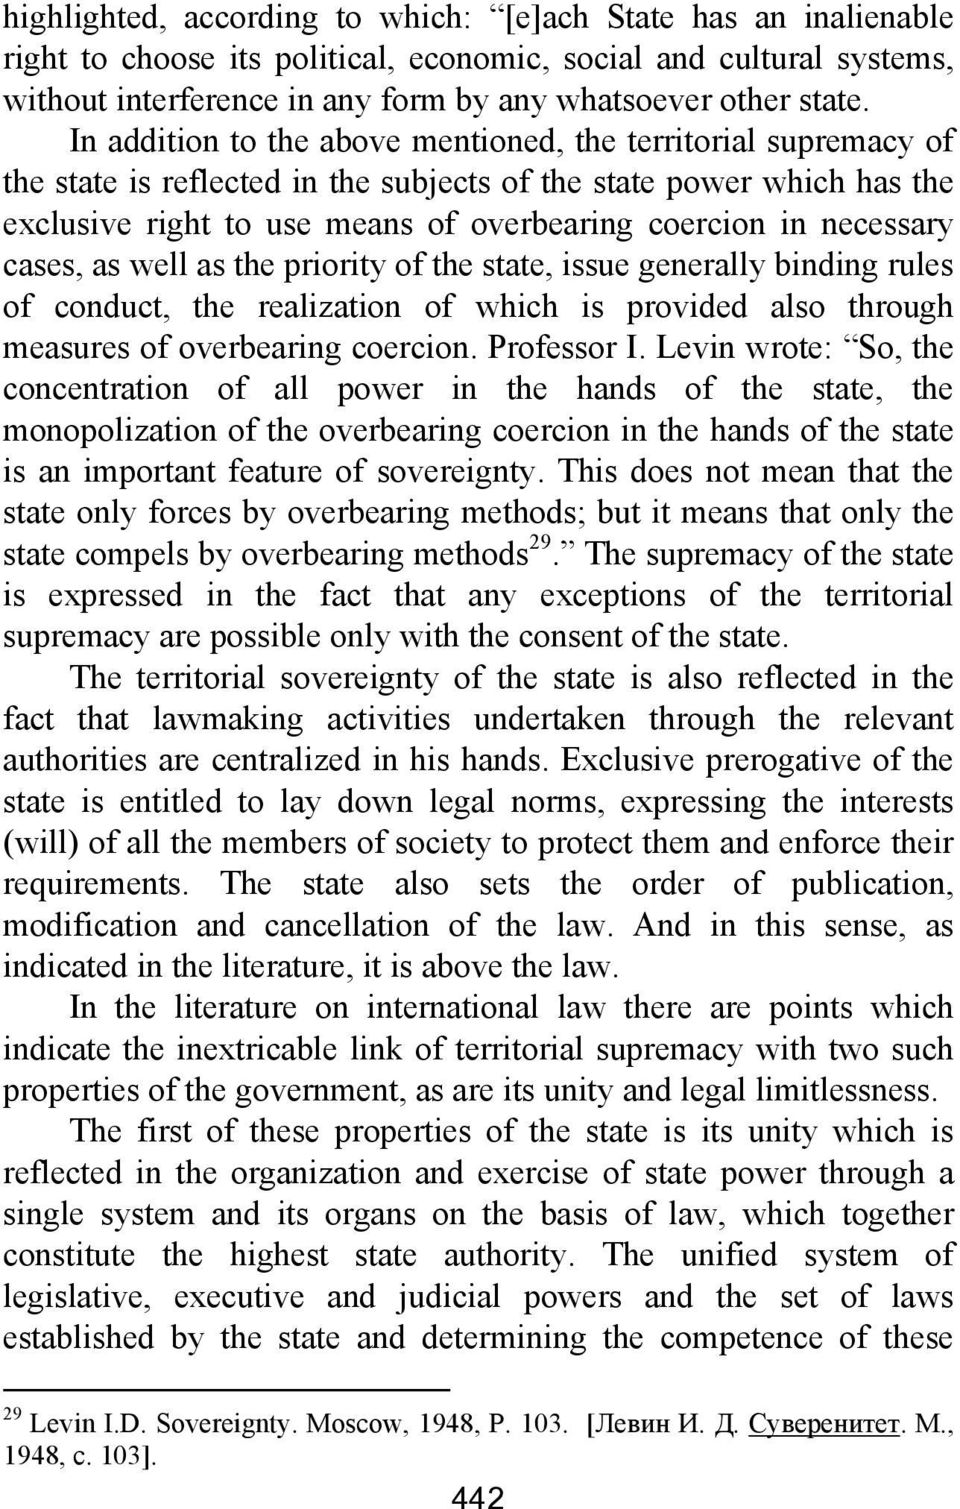 necessary cases, as well as the priority of the state, issue generally binding rules of conduct, the realization of which is provided also through measures of overbearing coercion. Professor I.